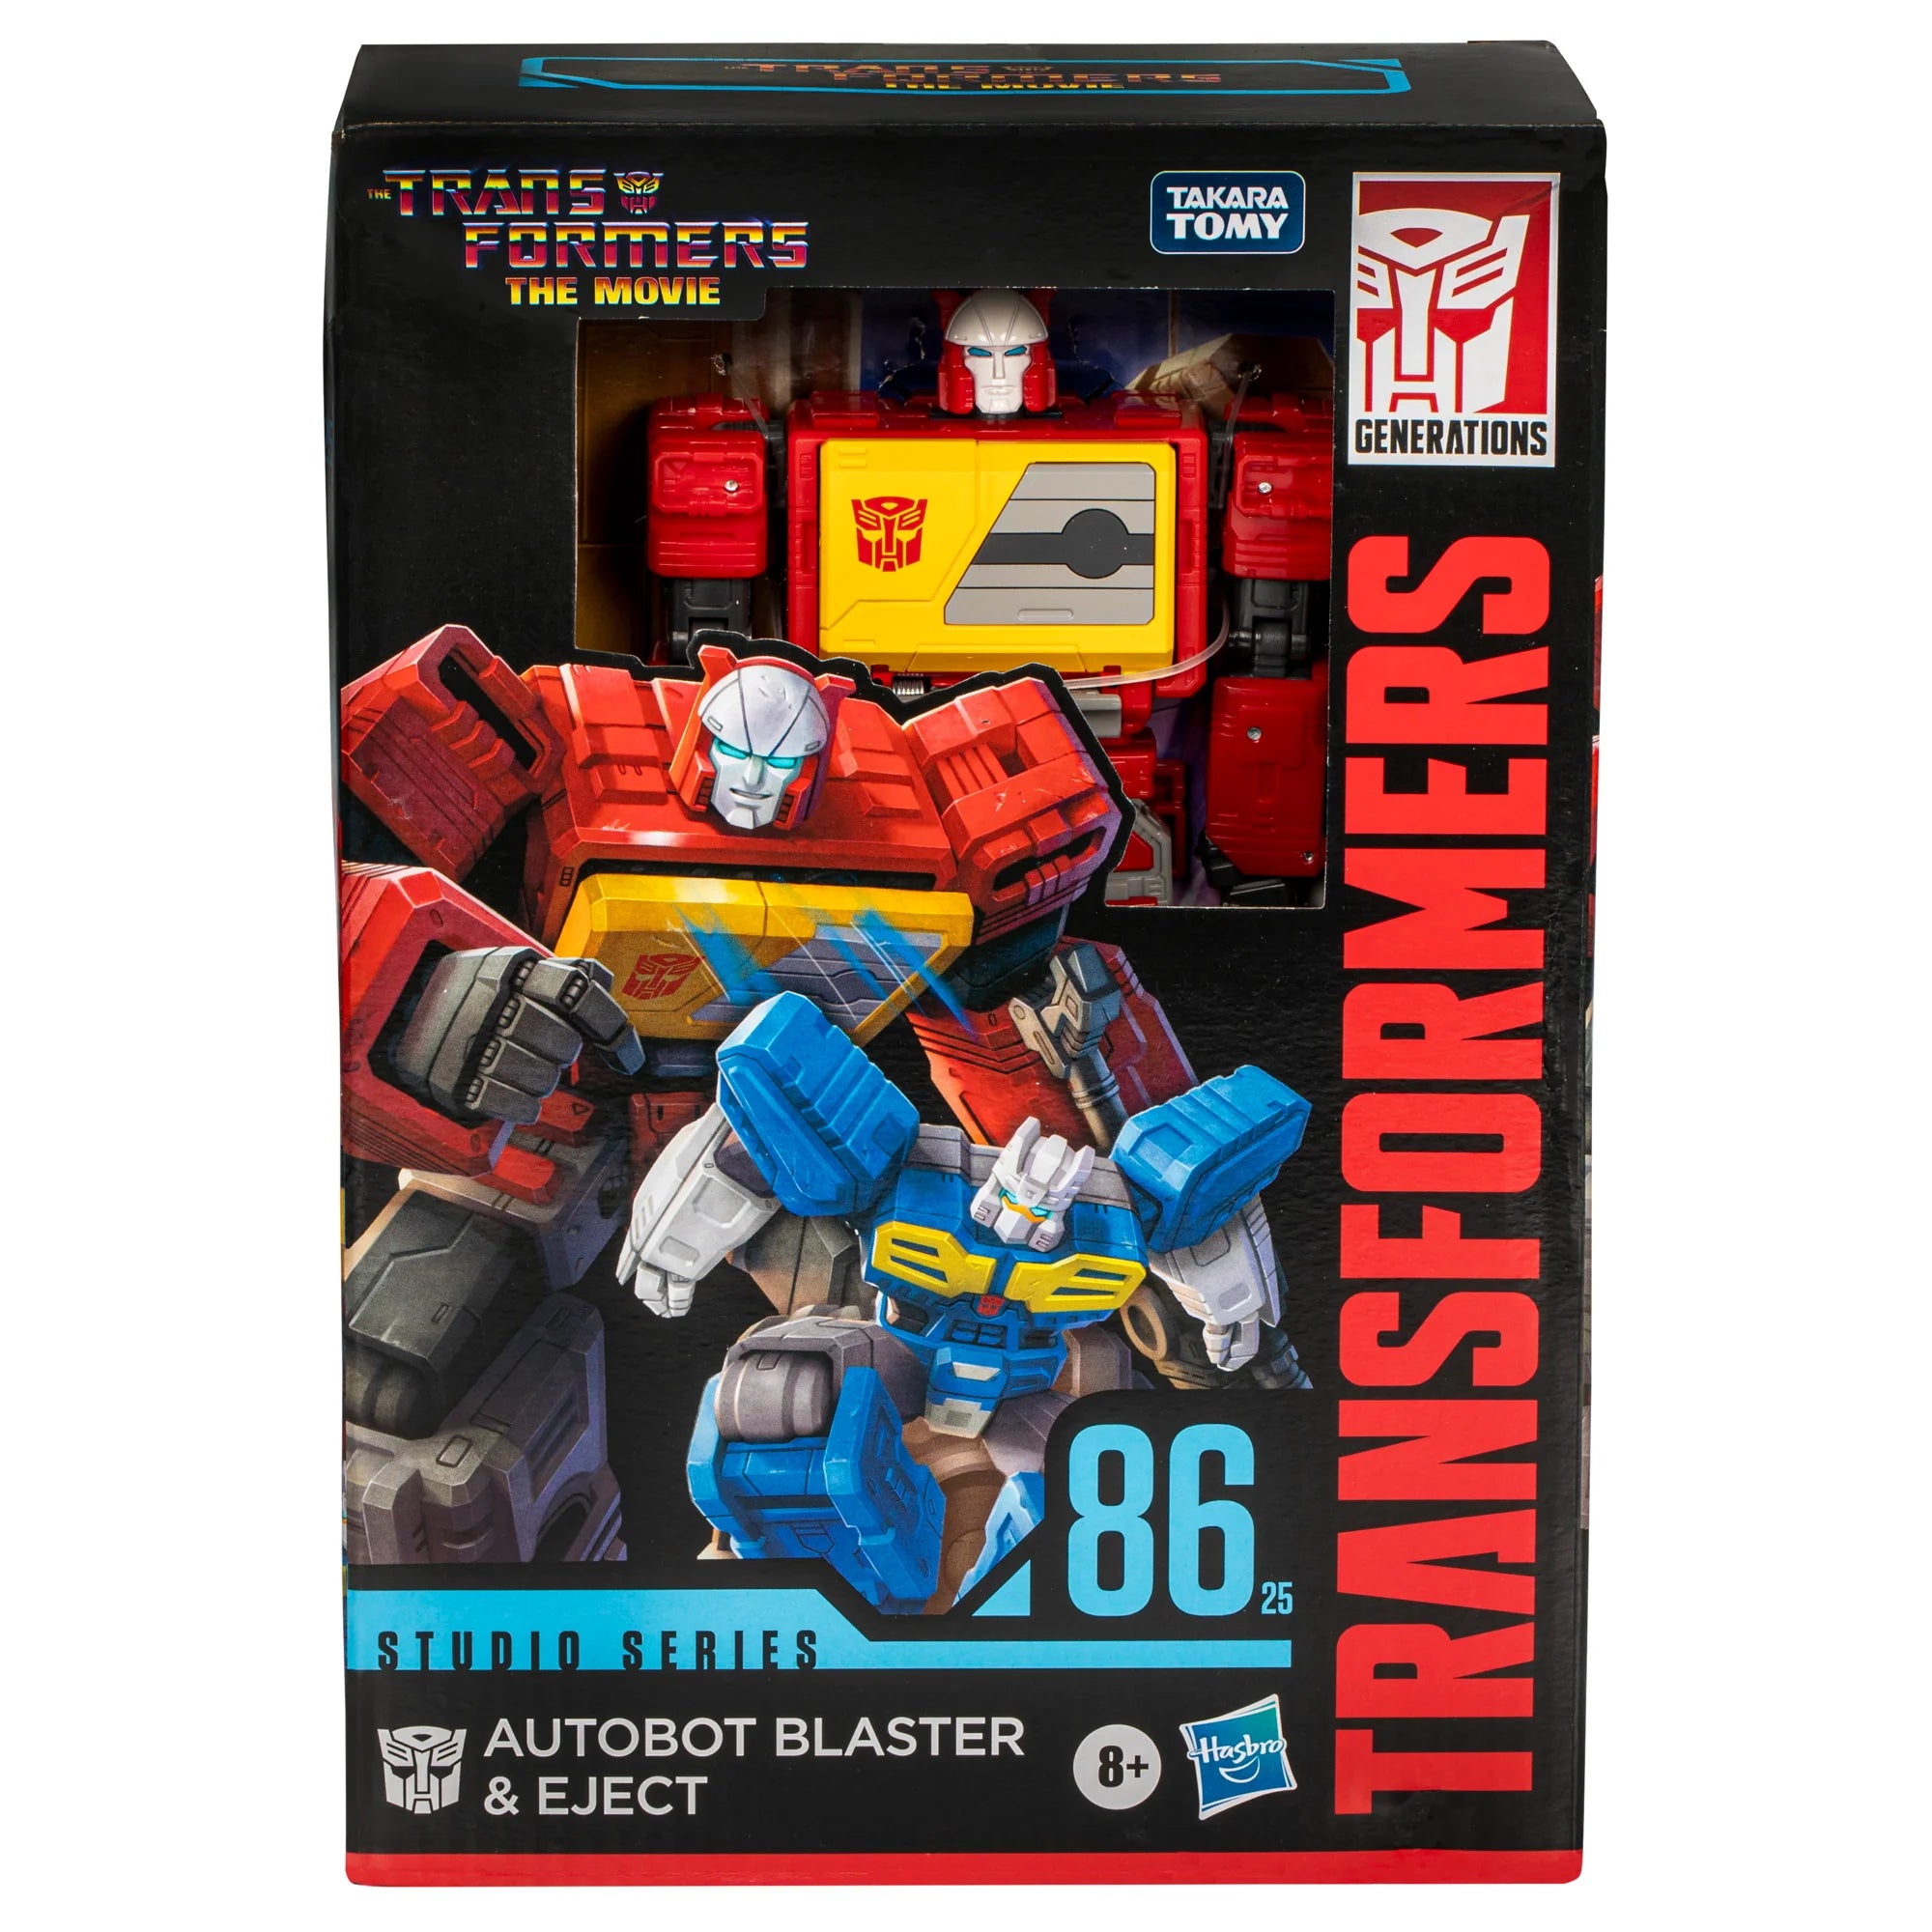 Transformers Generations Studio Series 86 #25 Voyager Autobot Blaster and Eject Action Figure